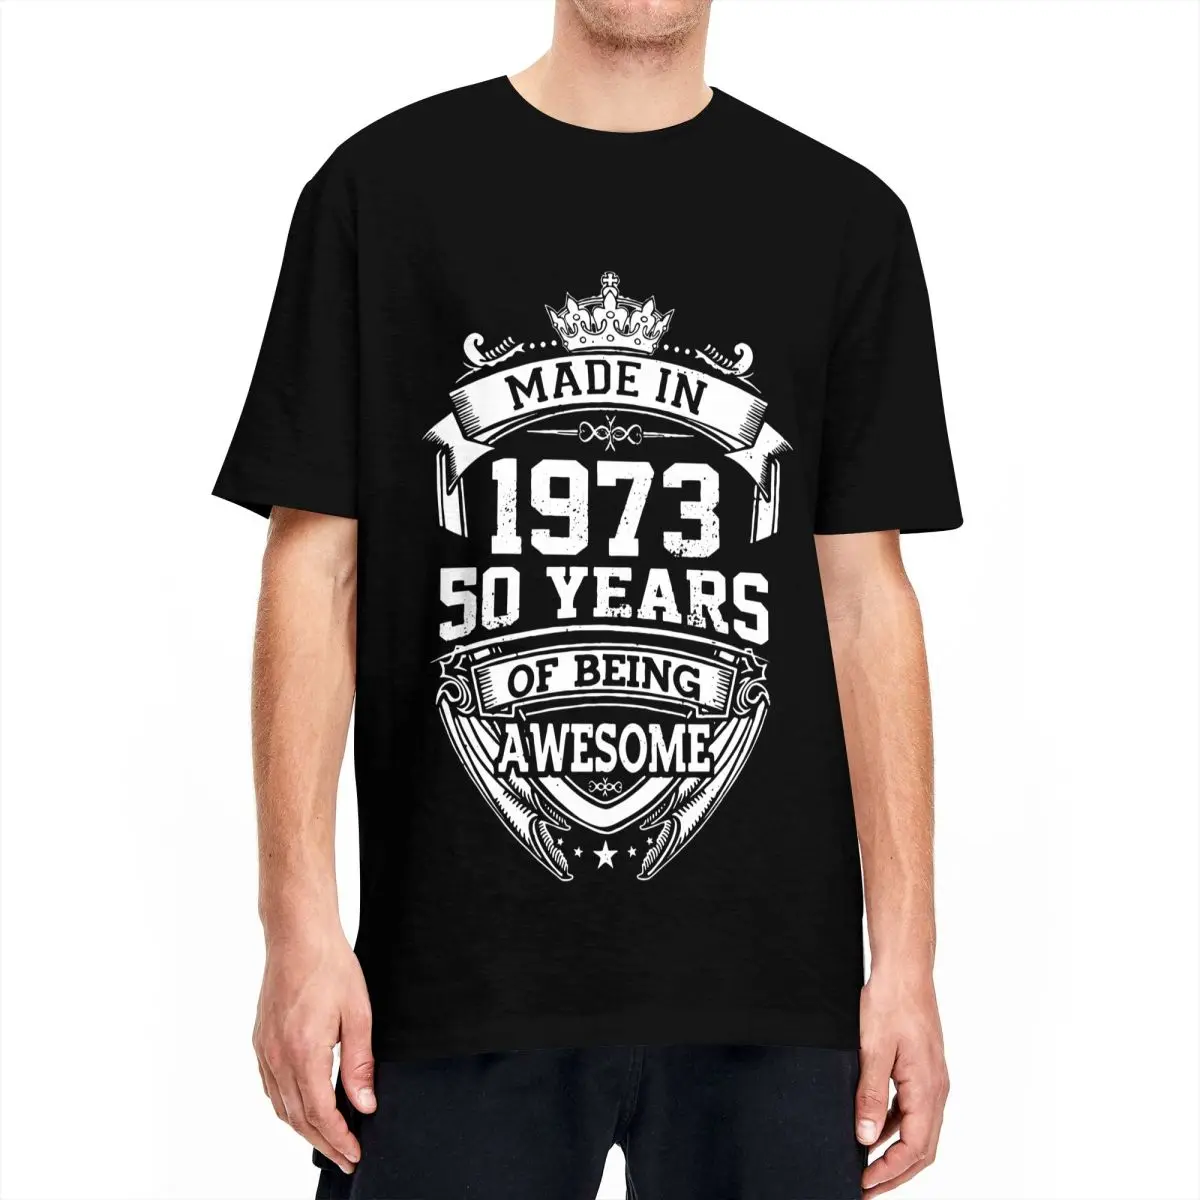 

Fashion Made In 1973 50 Years Of Being Awesome Old T-Shirts for Men Pure Cotton T Shirt 50th Birthday Tee Shirt Summer Tops